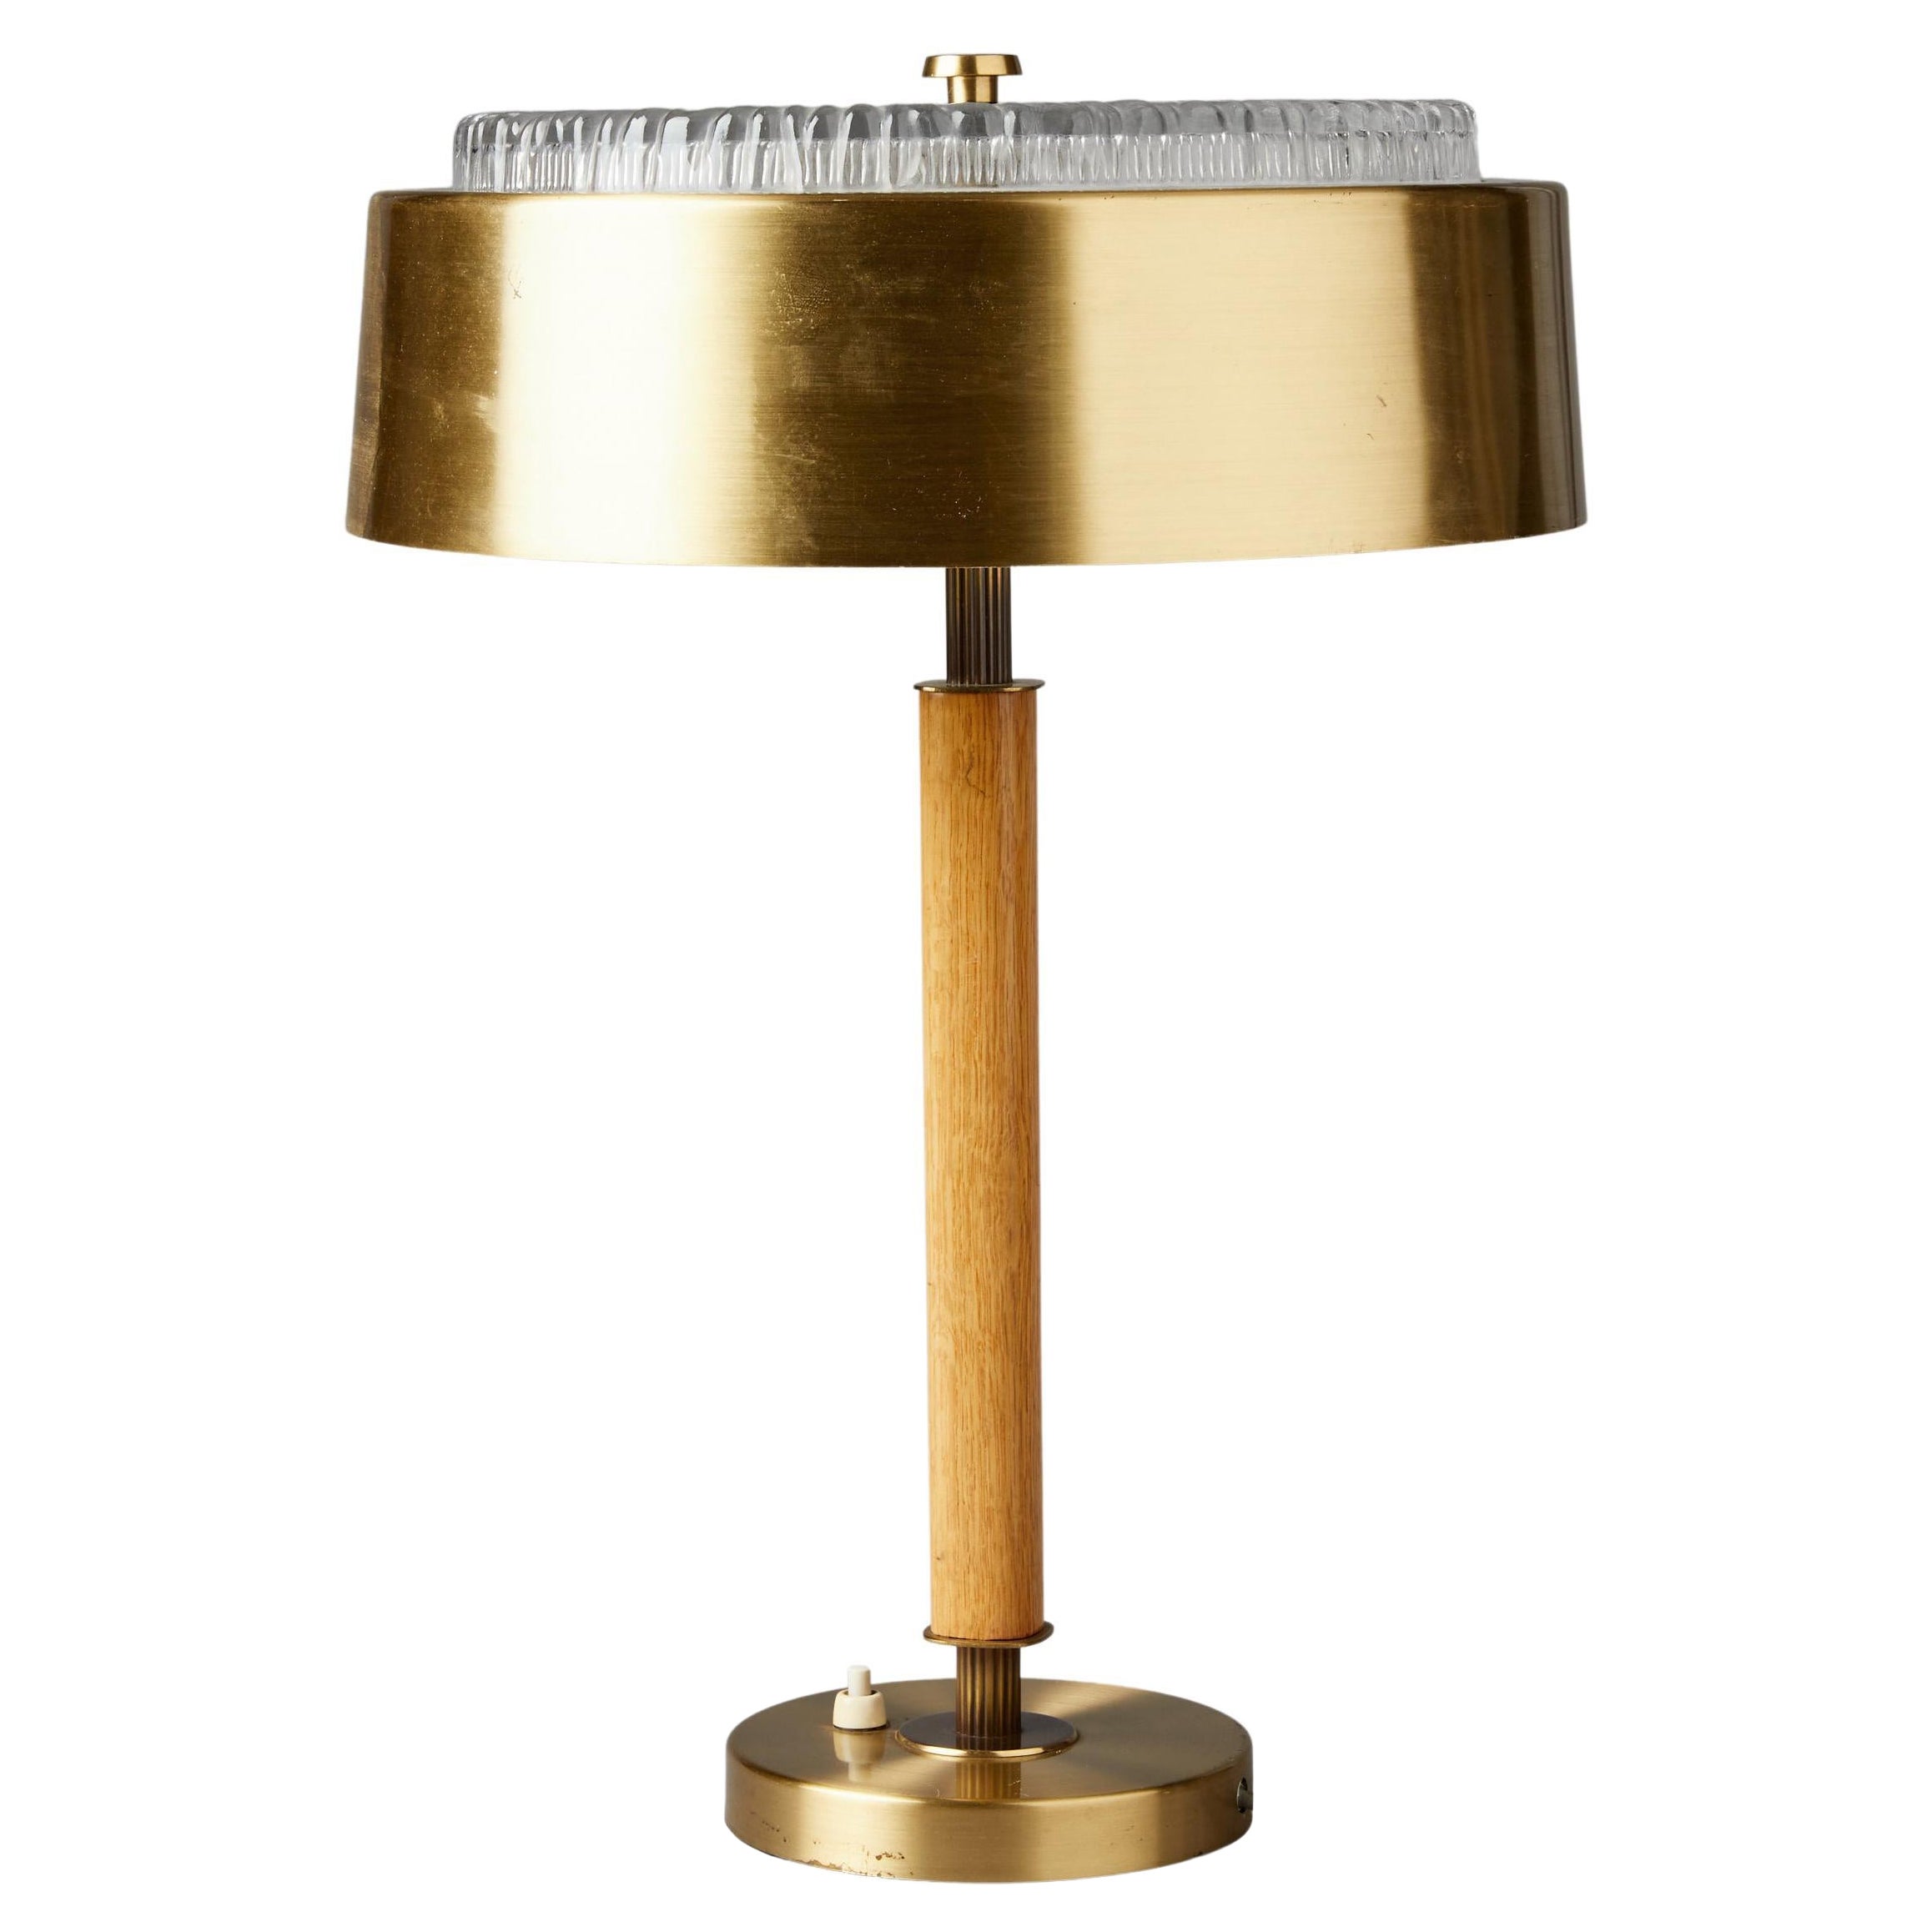 Swedish Midcentury Table Lamp in Brass, Crystal and Wood by Boréns For Sale